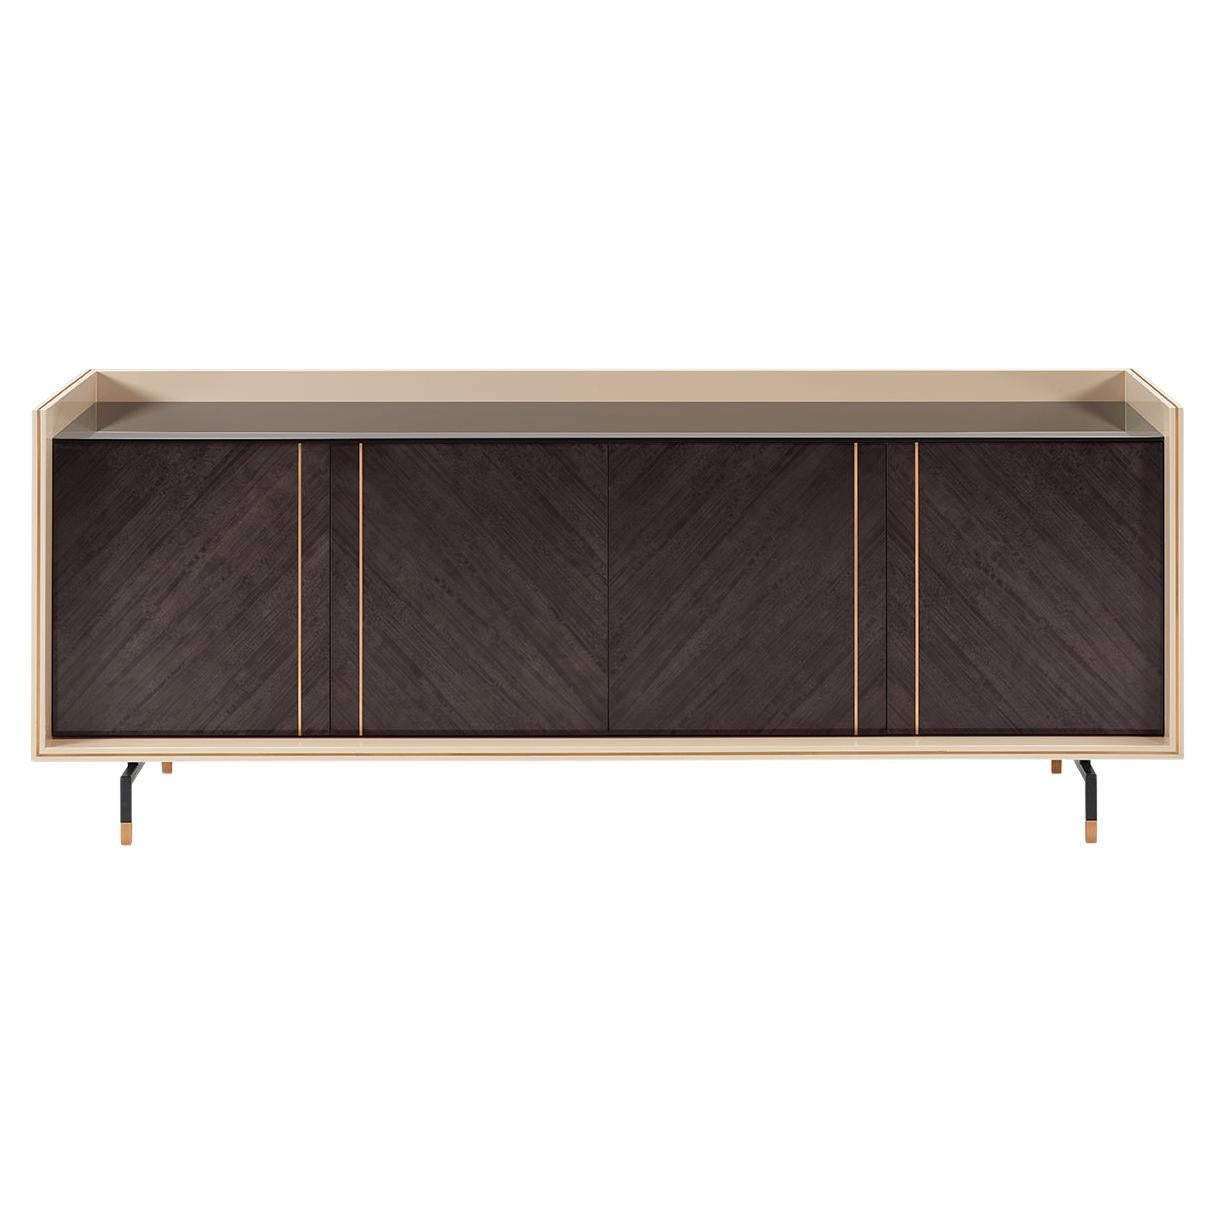 COOPER wood sideboard with Antique Brass details